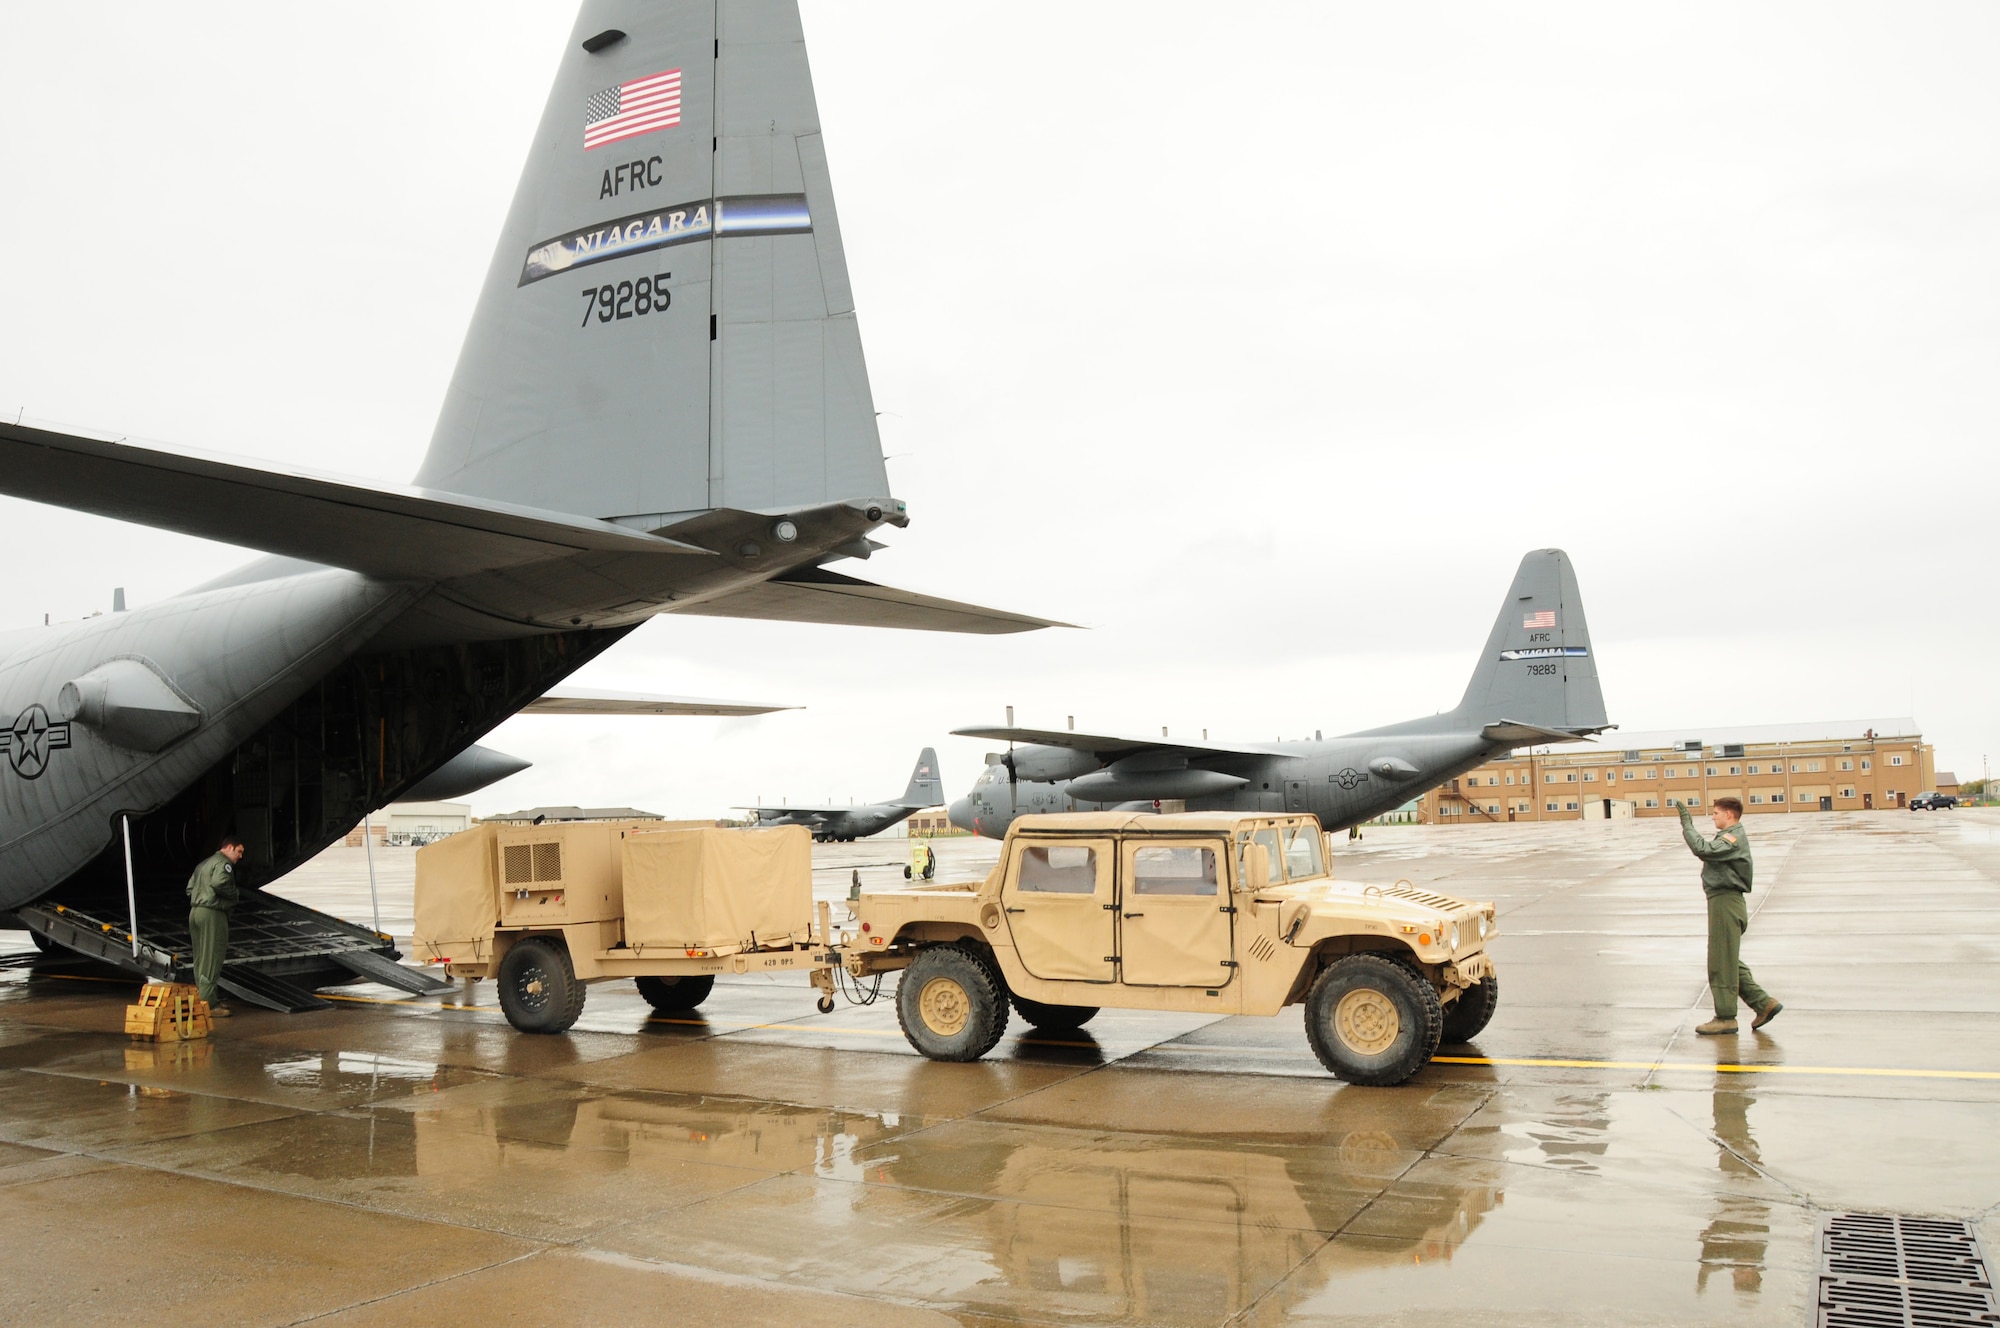 The operational company of the 42nd Infantry Division of the Army National Guard arrived ready to train with the 107th Airlift Wing's C-130 loadmasters. Airman 1st Class Limina guides the High Mobility Multipurpose Wheeled Vehicle (HMMWV), onto the C-130 aircraft. Army Guard Sgt. Albi is behind the wheel of the HMMWV. Oct. 20, 2012 (U.S. Air Force Photo/Senior Master Sgt. Ray Lloyd)
